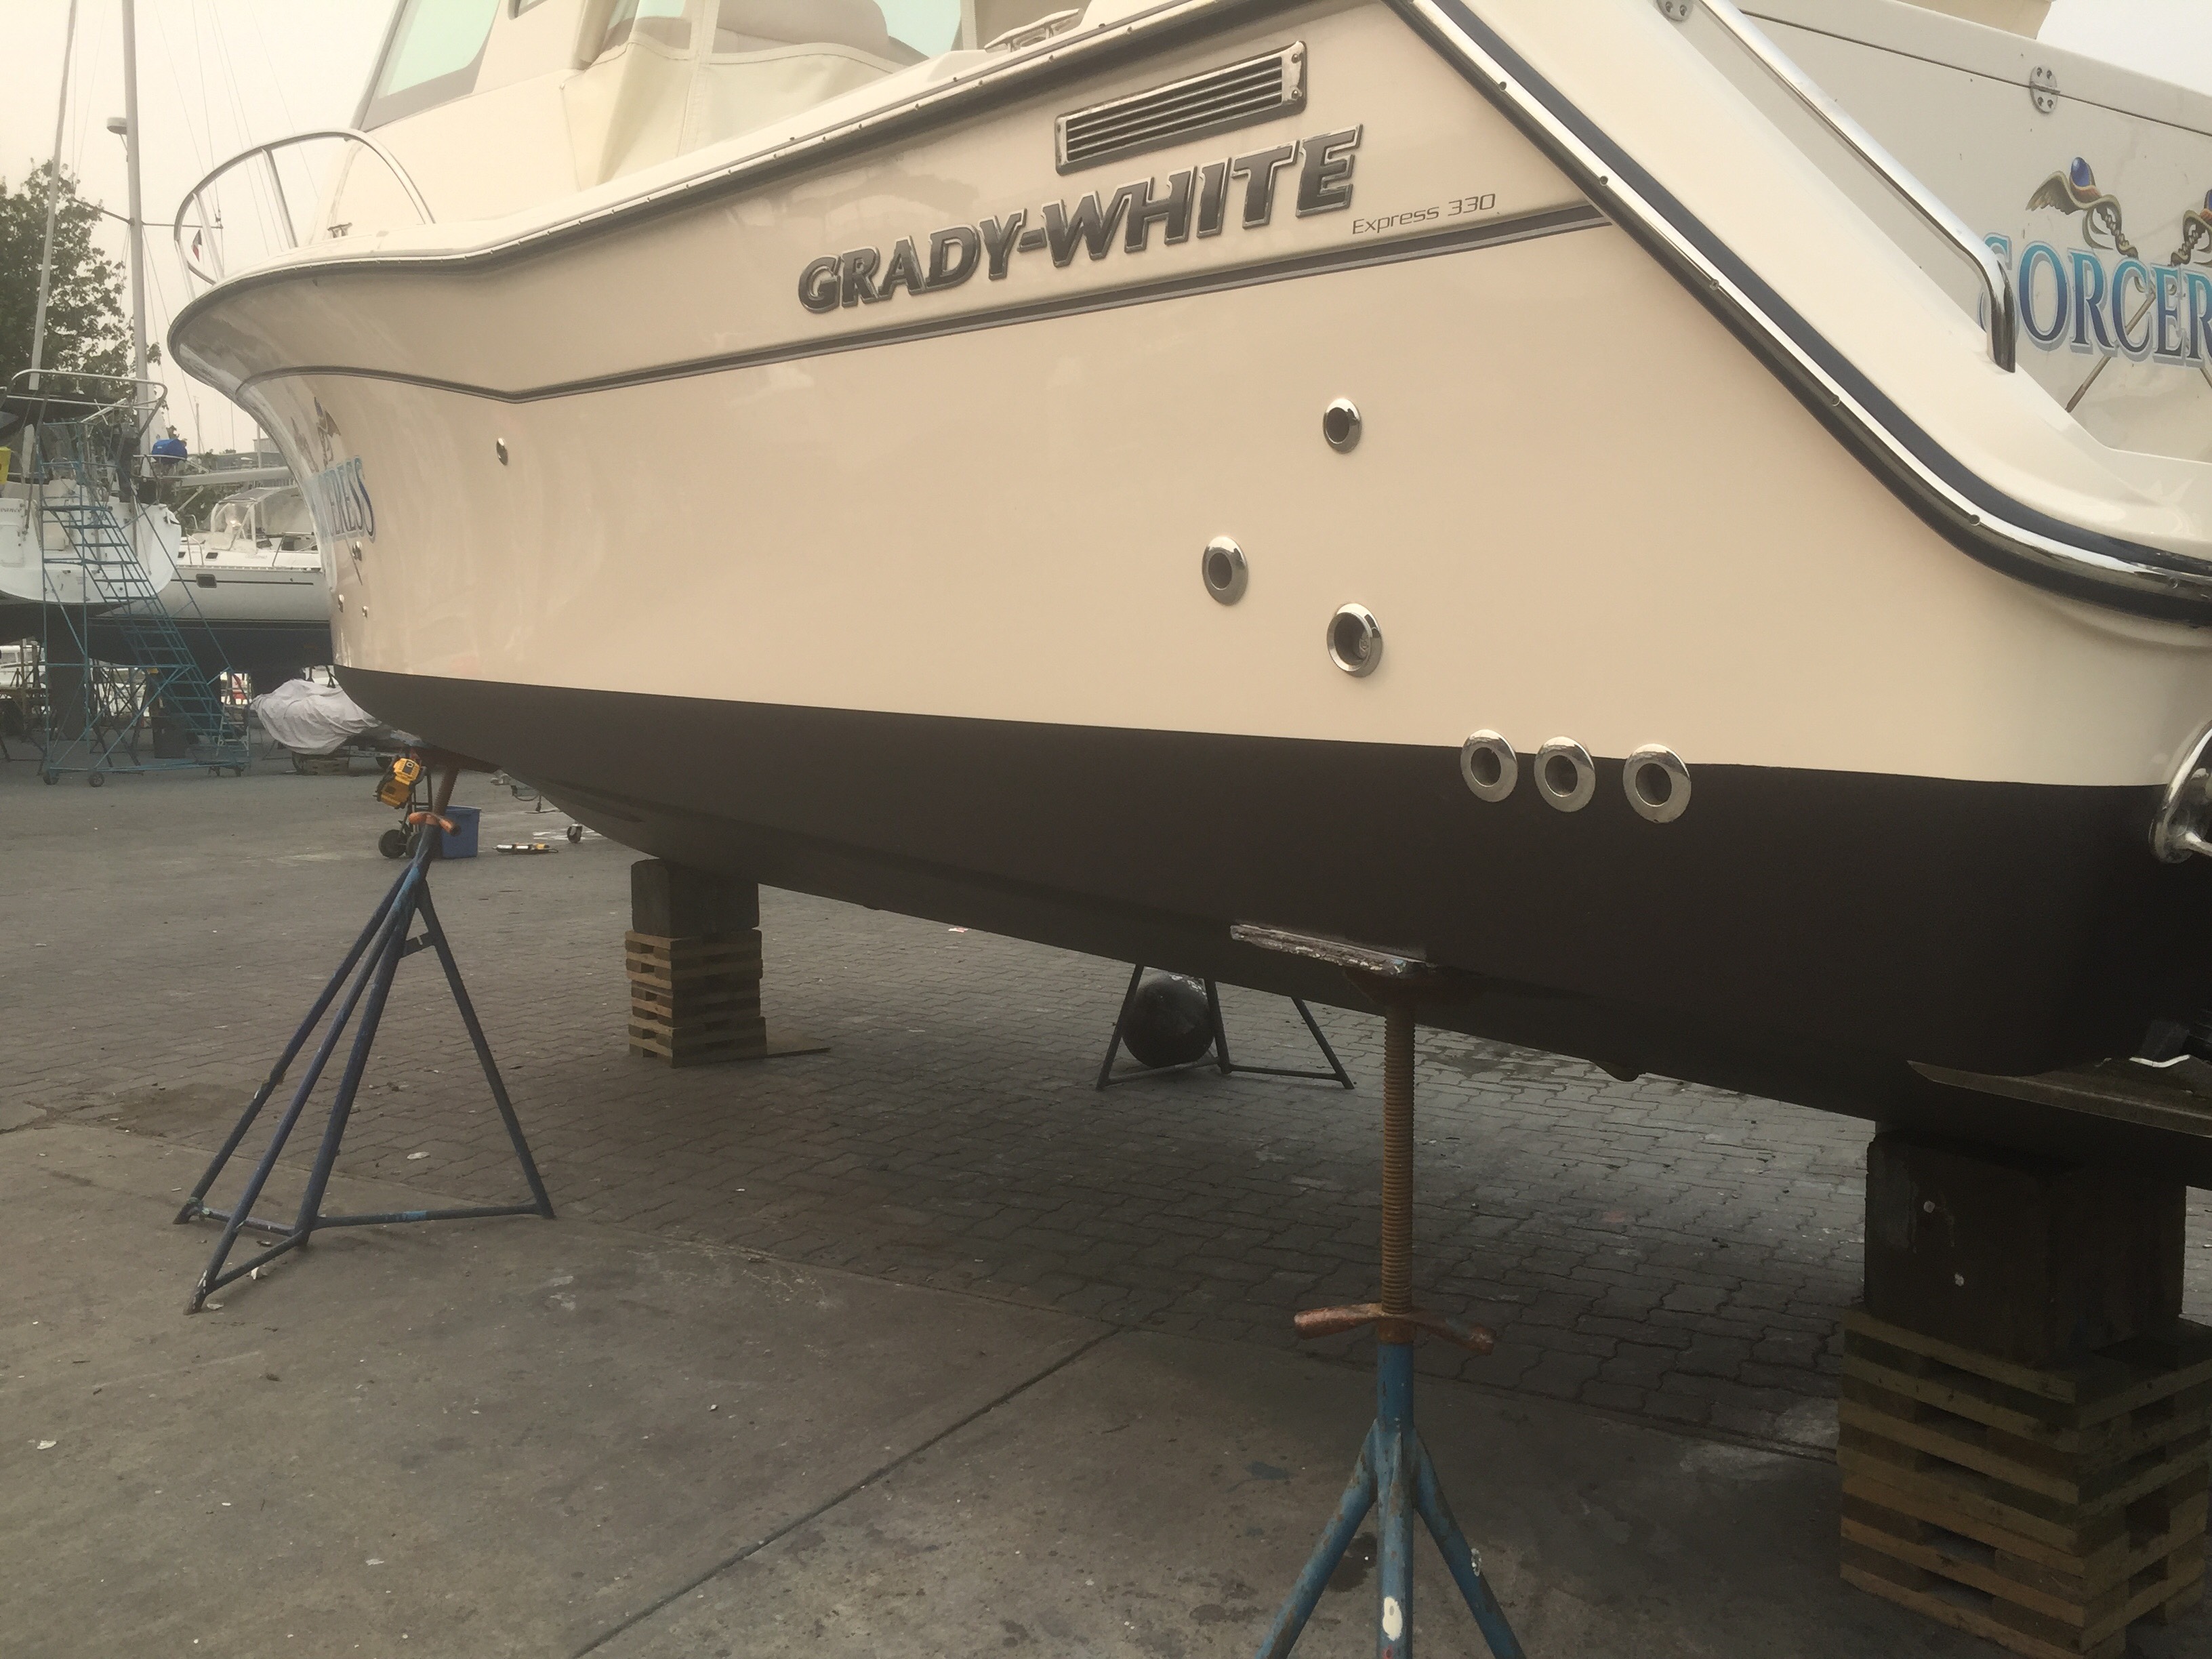 Grady White boat maintenance and repairs from MRV Marine Services.